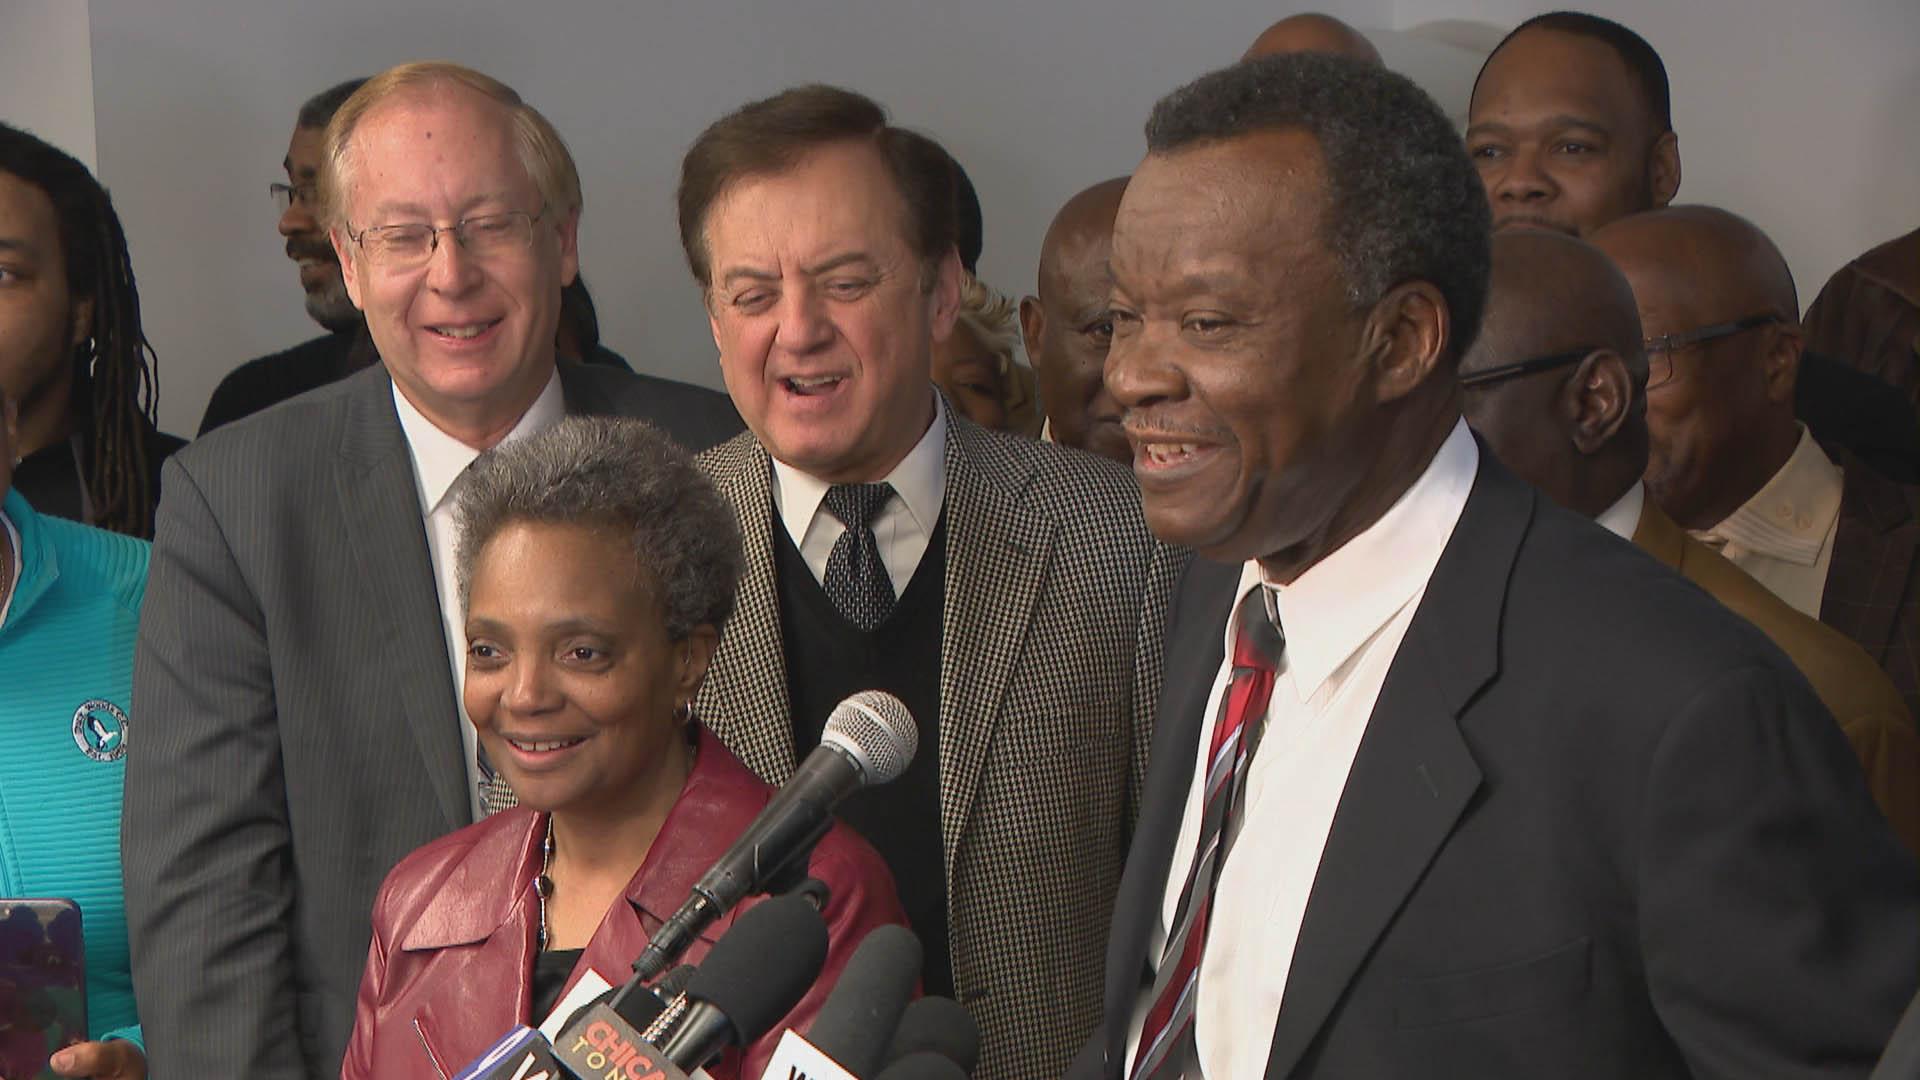 Willie Wilson announces his endorsement of Lori Lightfoot for mayor on March 8, 2019. (Chicago Tonight)